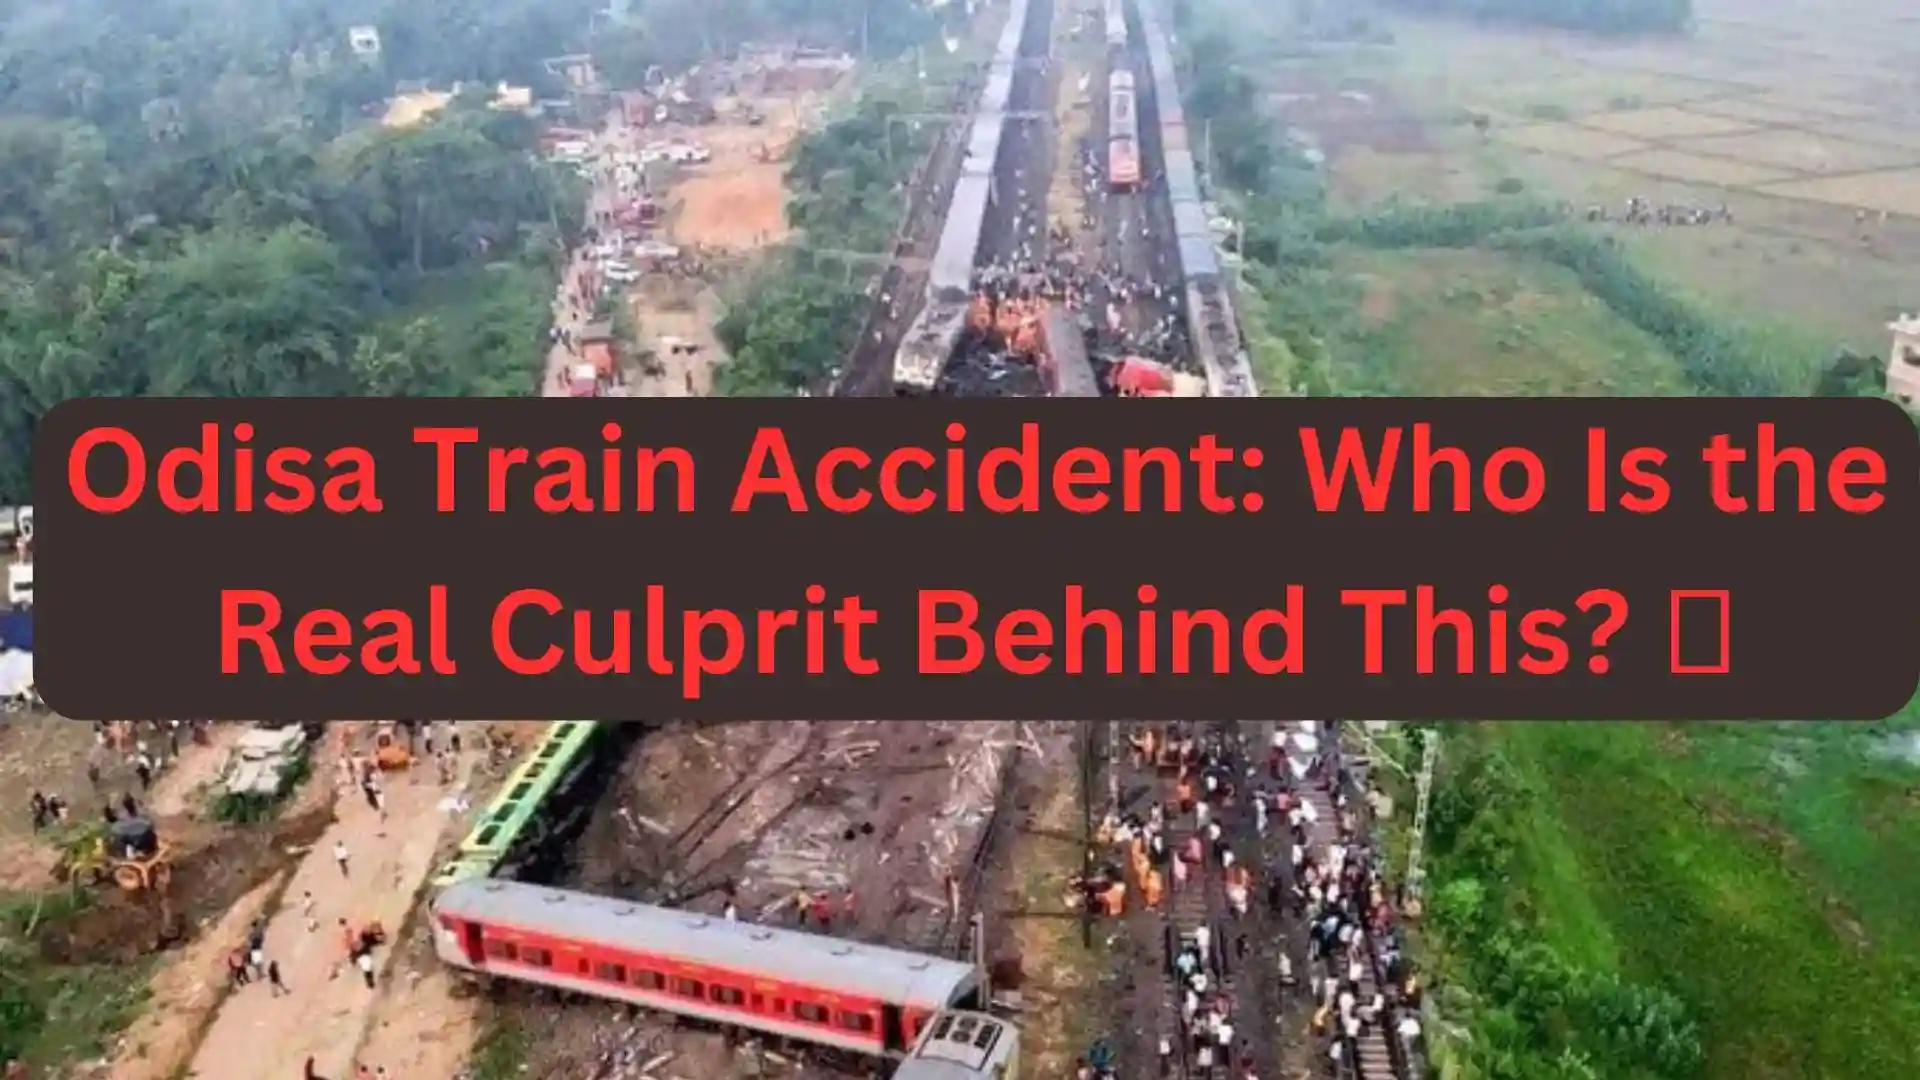 Odisa Train Accident Who Is the Real Culprit Behind This 🤔